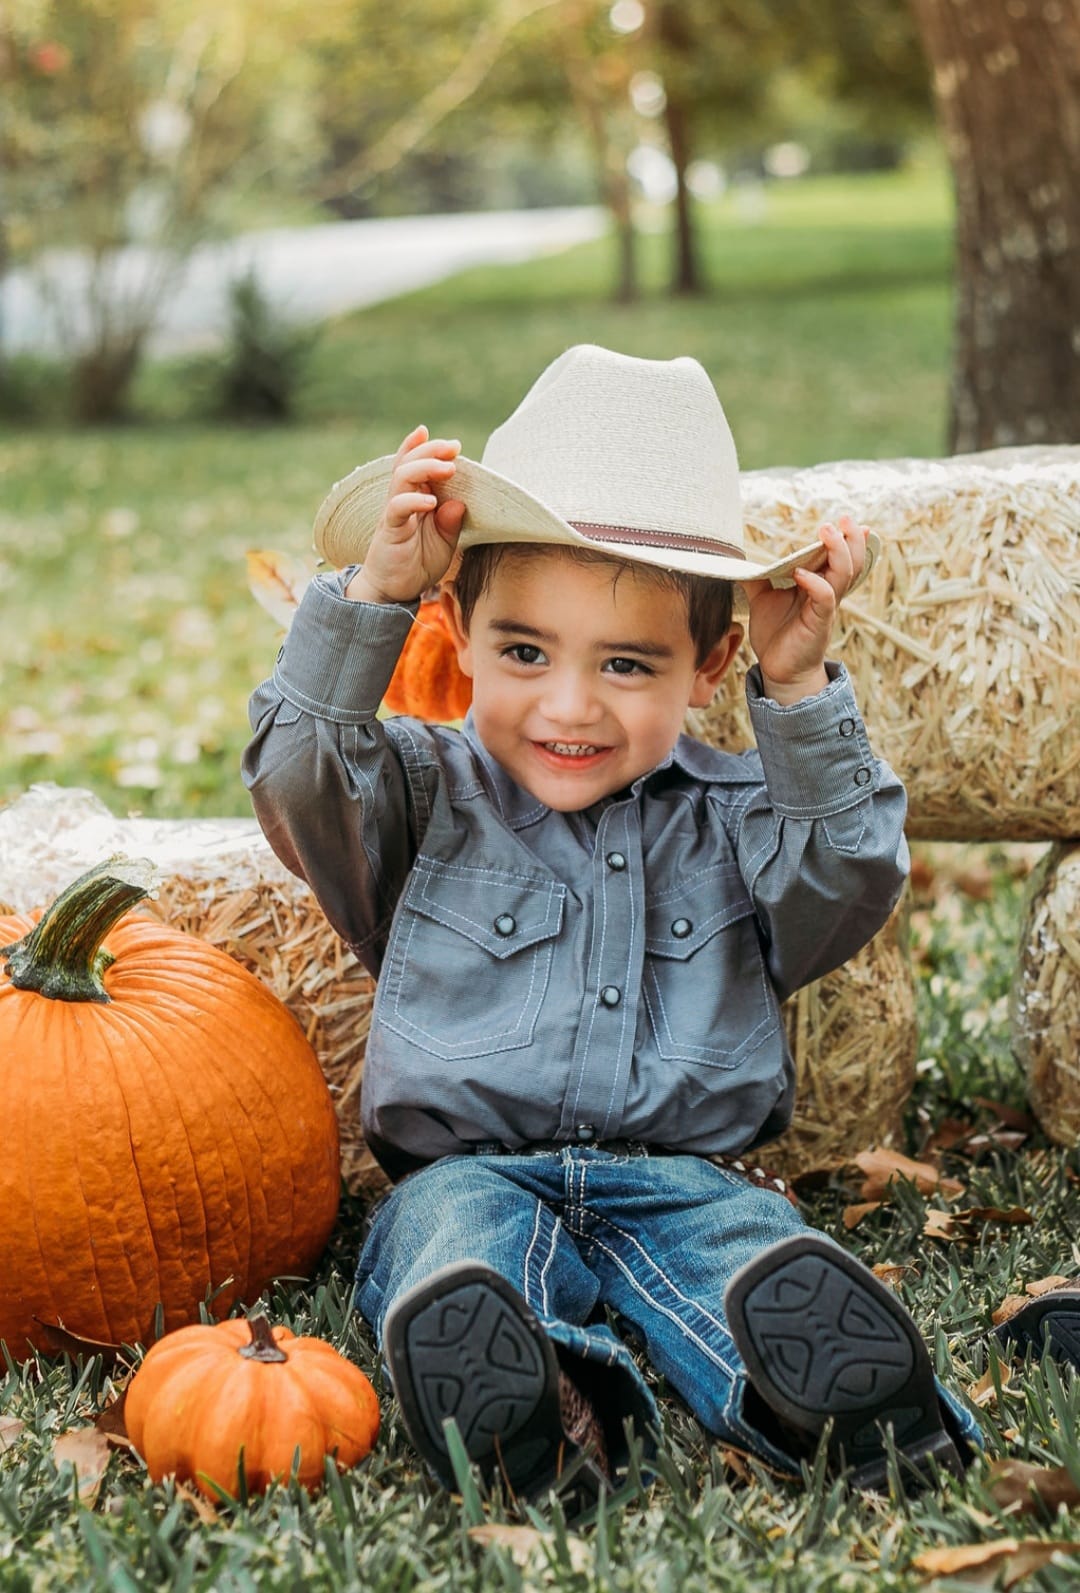 NORA knight's tr baby boy in a cowboy hat sitting with pumpkins and bales of hay